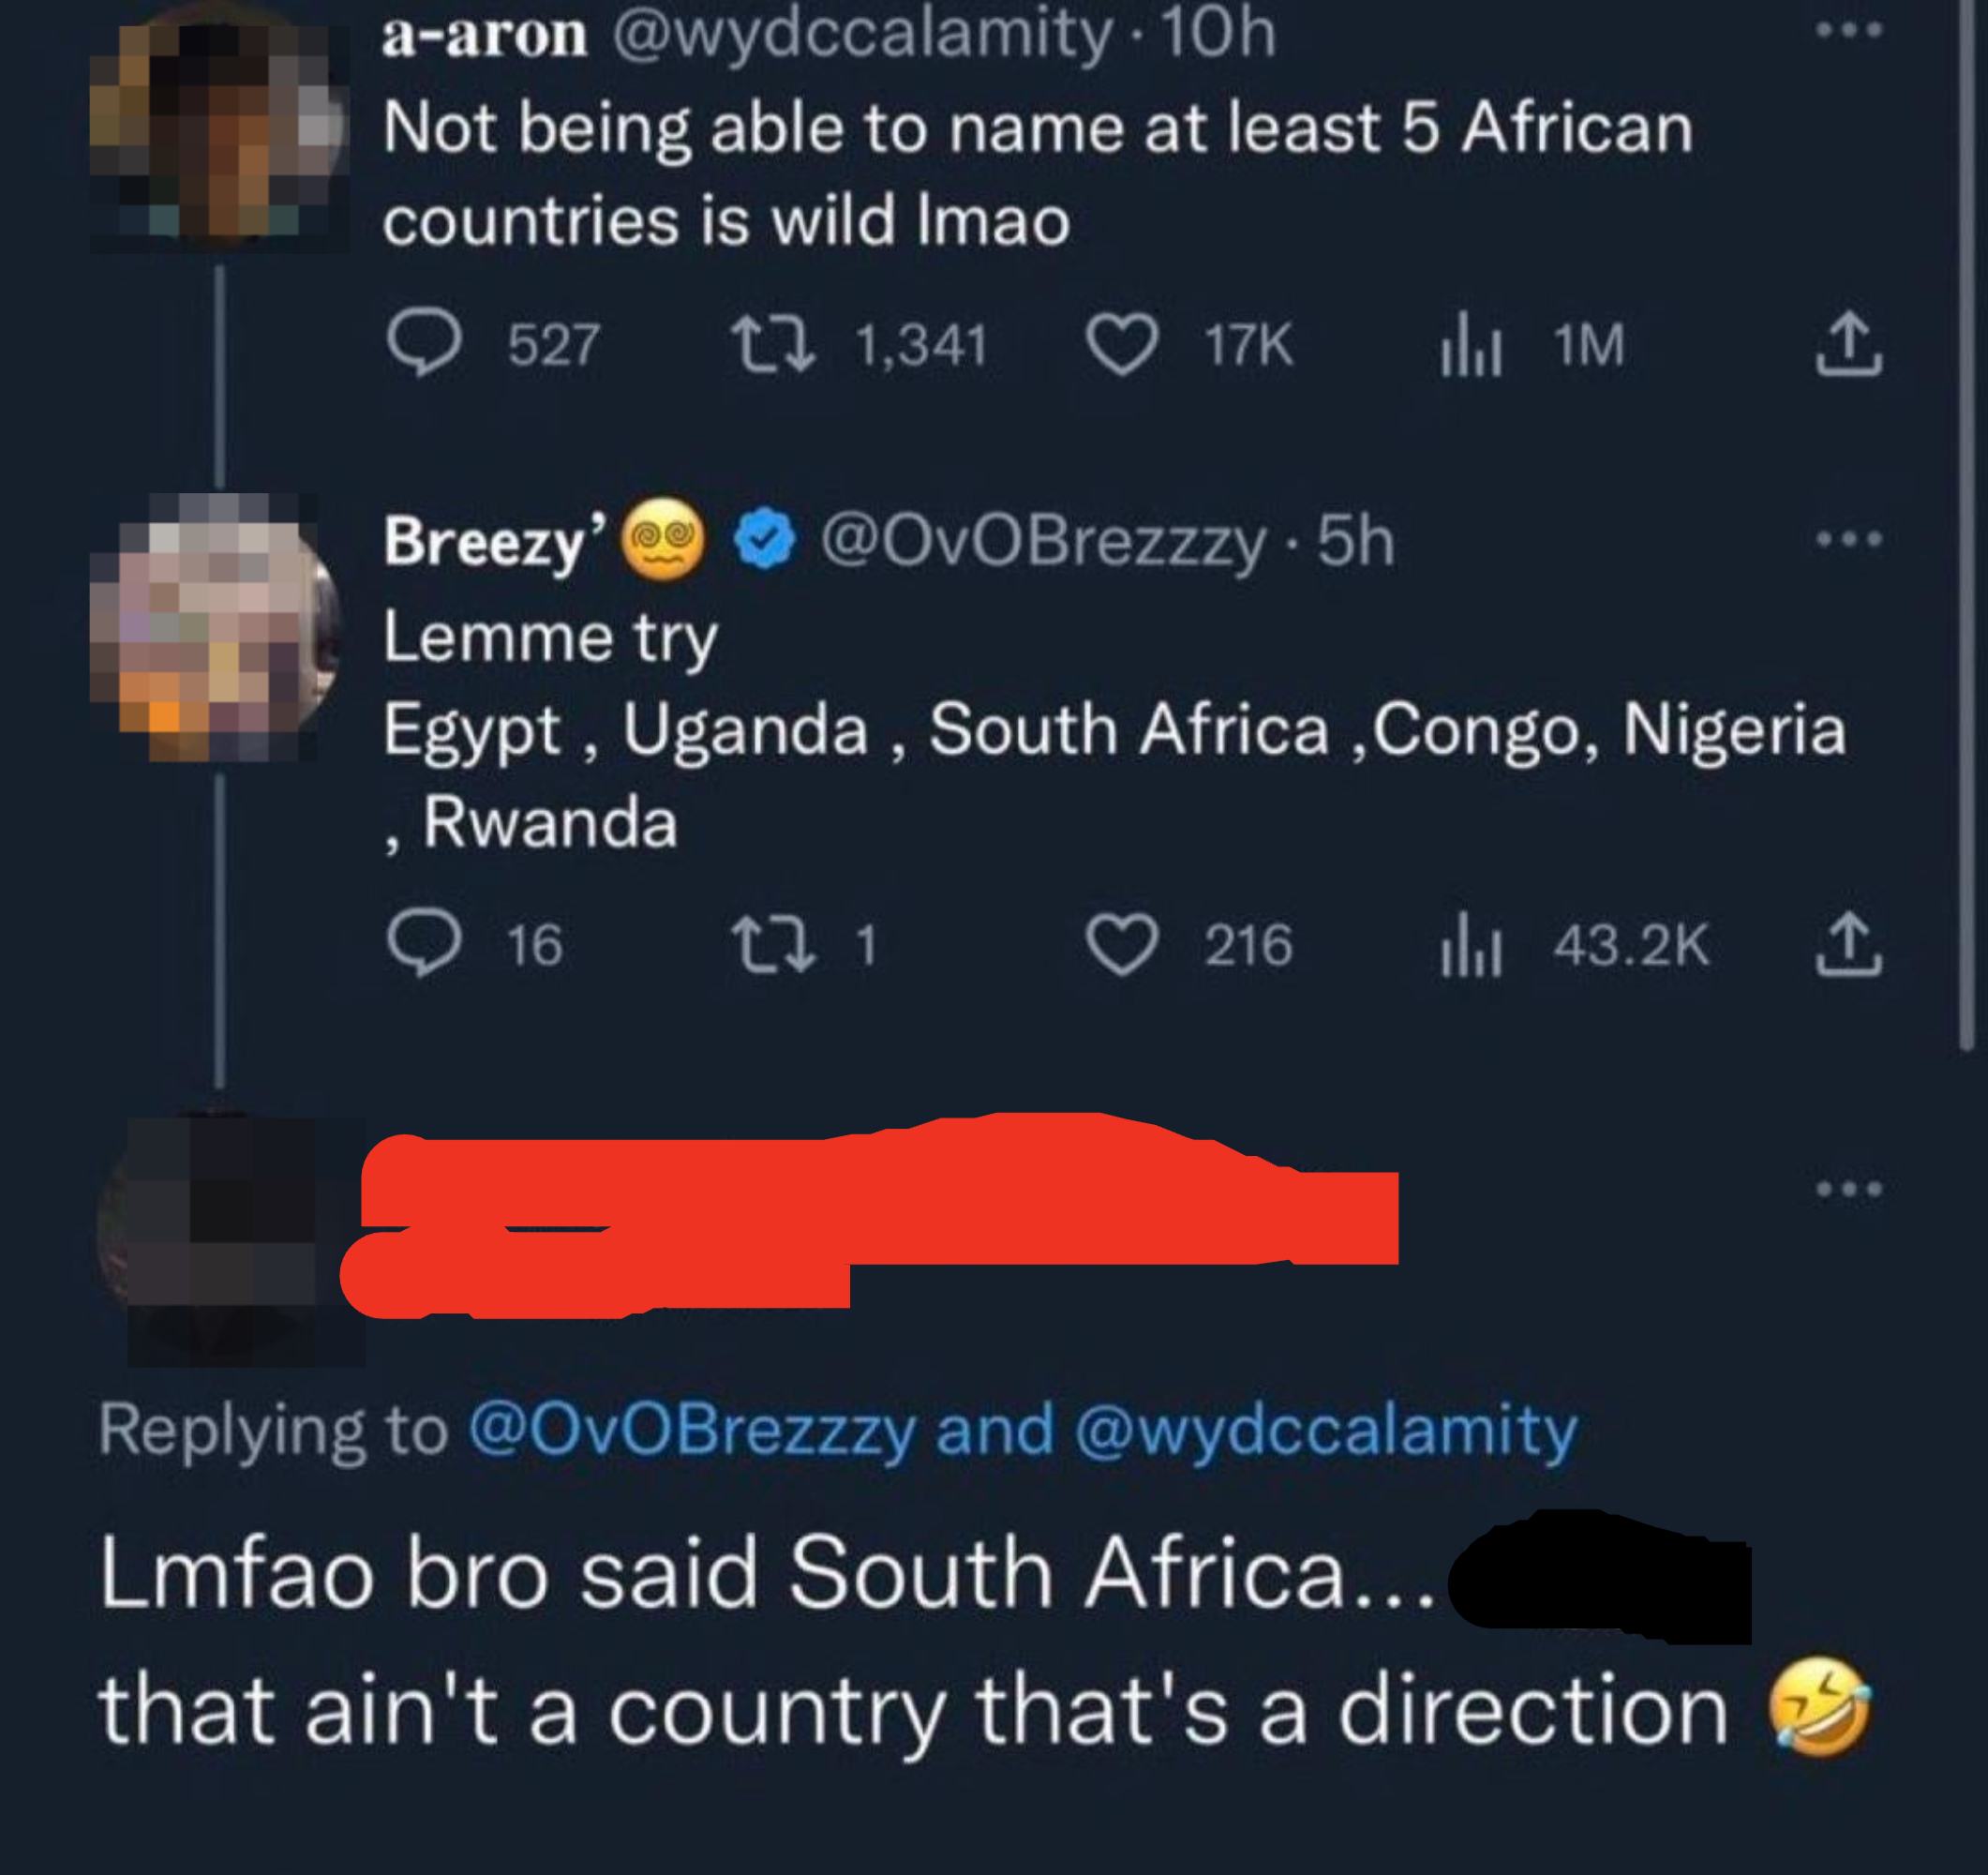 &quot;Not being able to name at least 5 African countries is wild,&quot; &quot;Lemme try: Egypt, Uganda, South Africa, Congo, Nigeria, Rwanda,&quot; &quot;LMFAO bro said South Africa — that ain&#x27;t a country that&#x27;s a direction&quot;